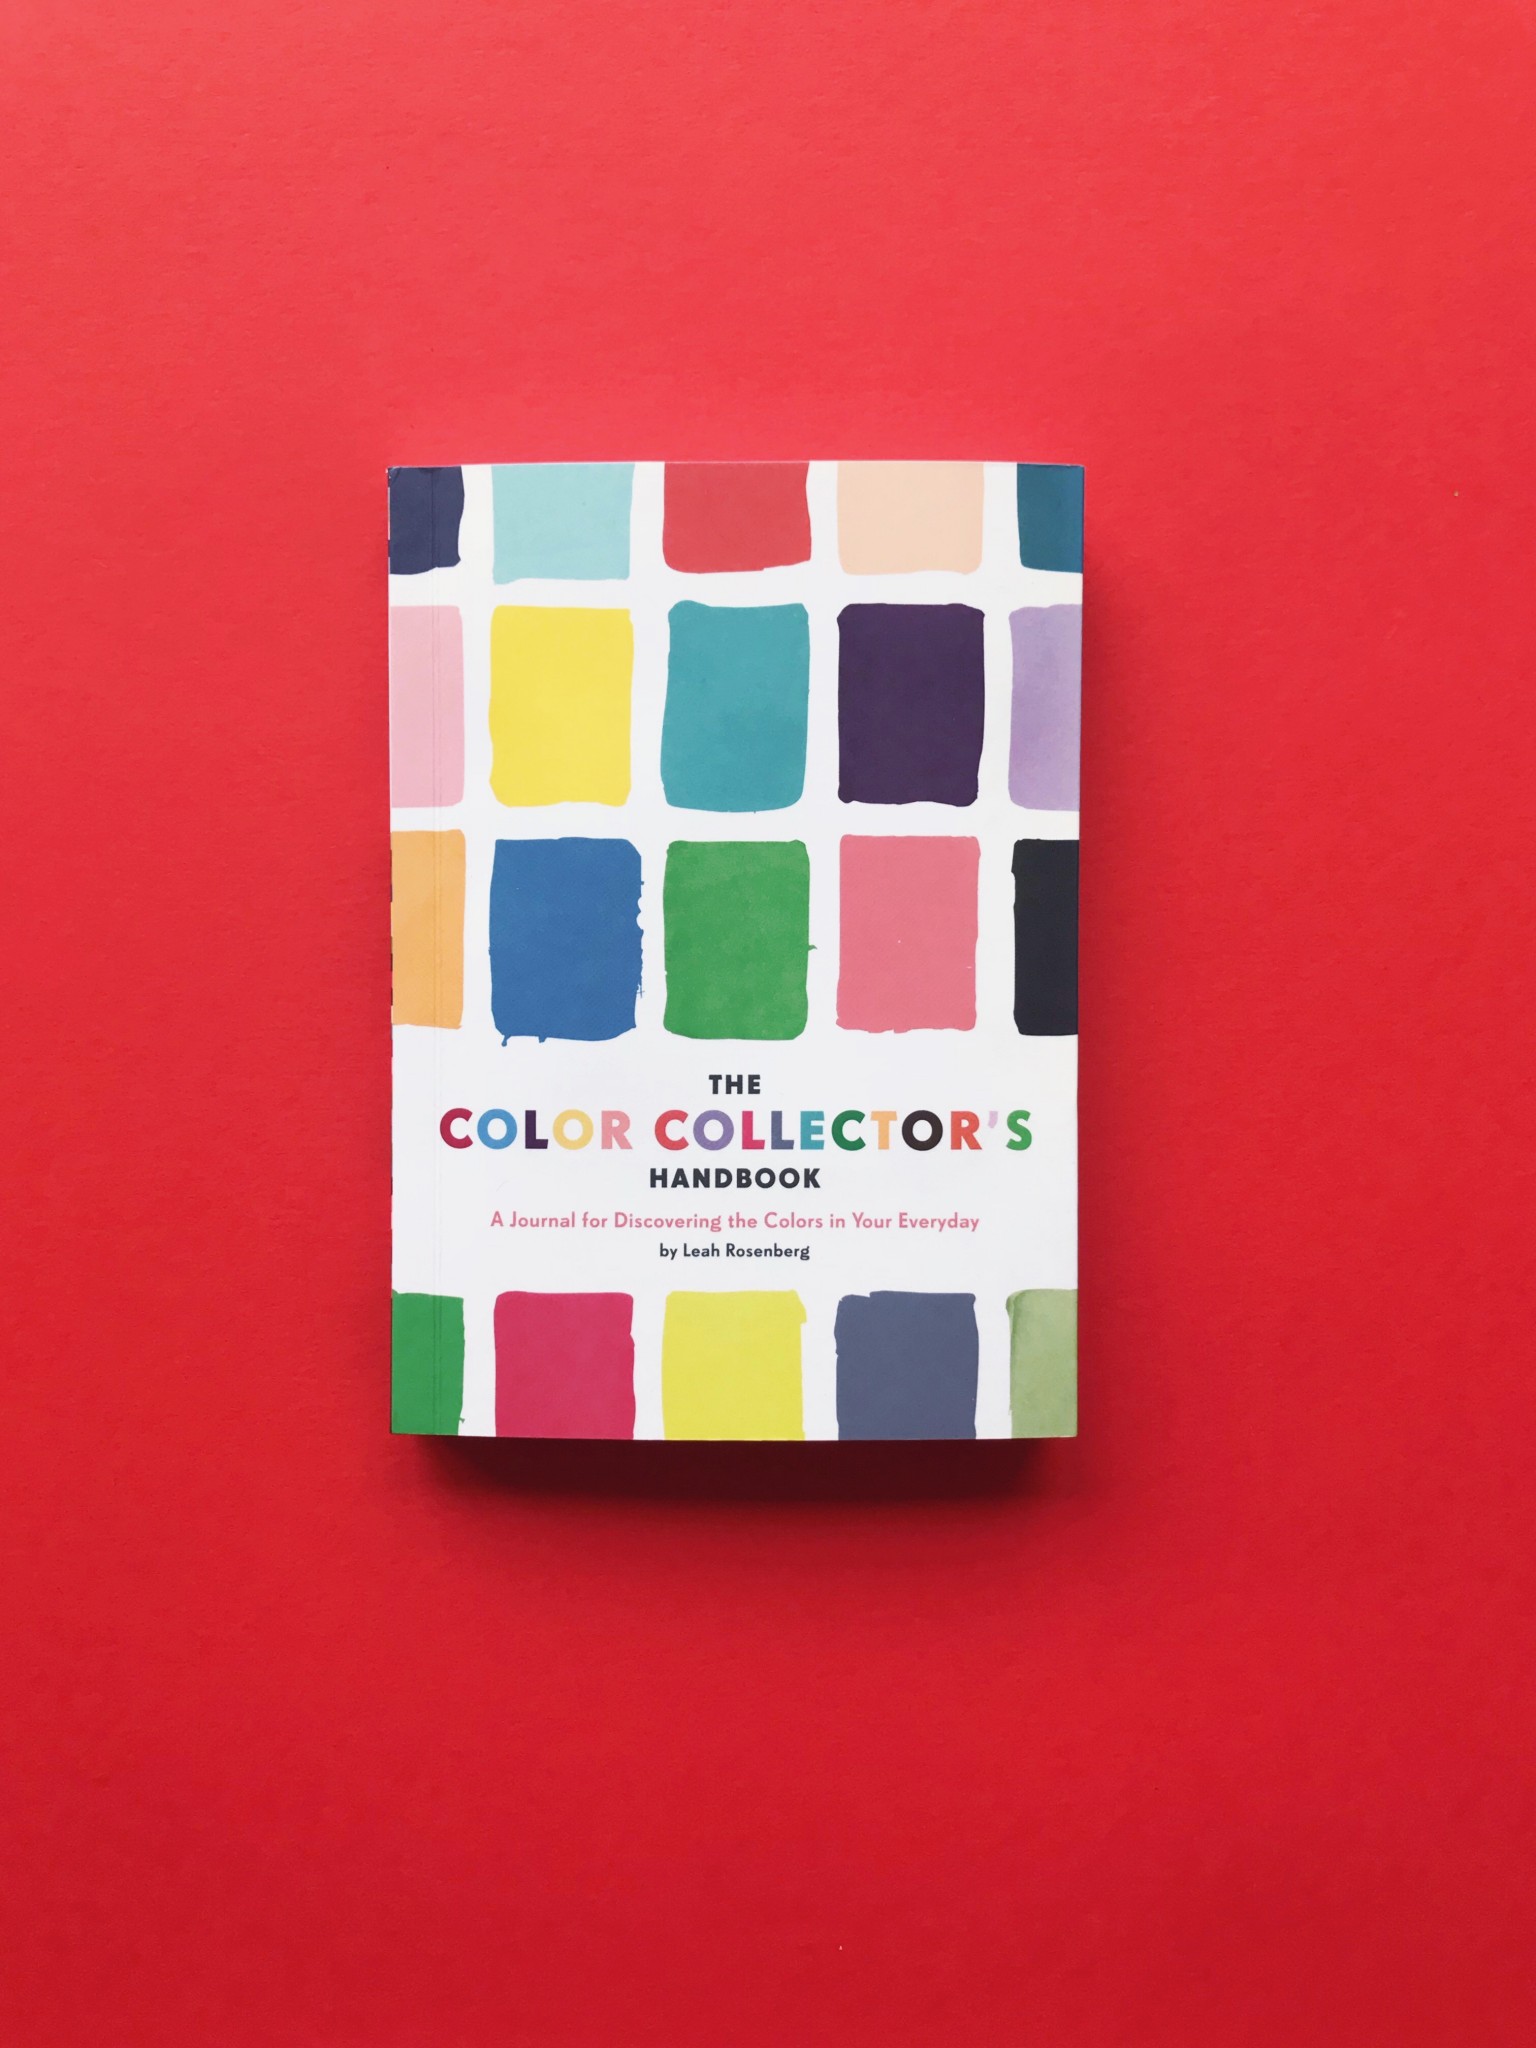 12 Essential Books About Color - The Aesthetics of Joy